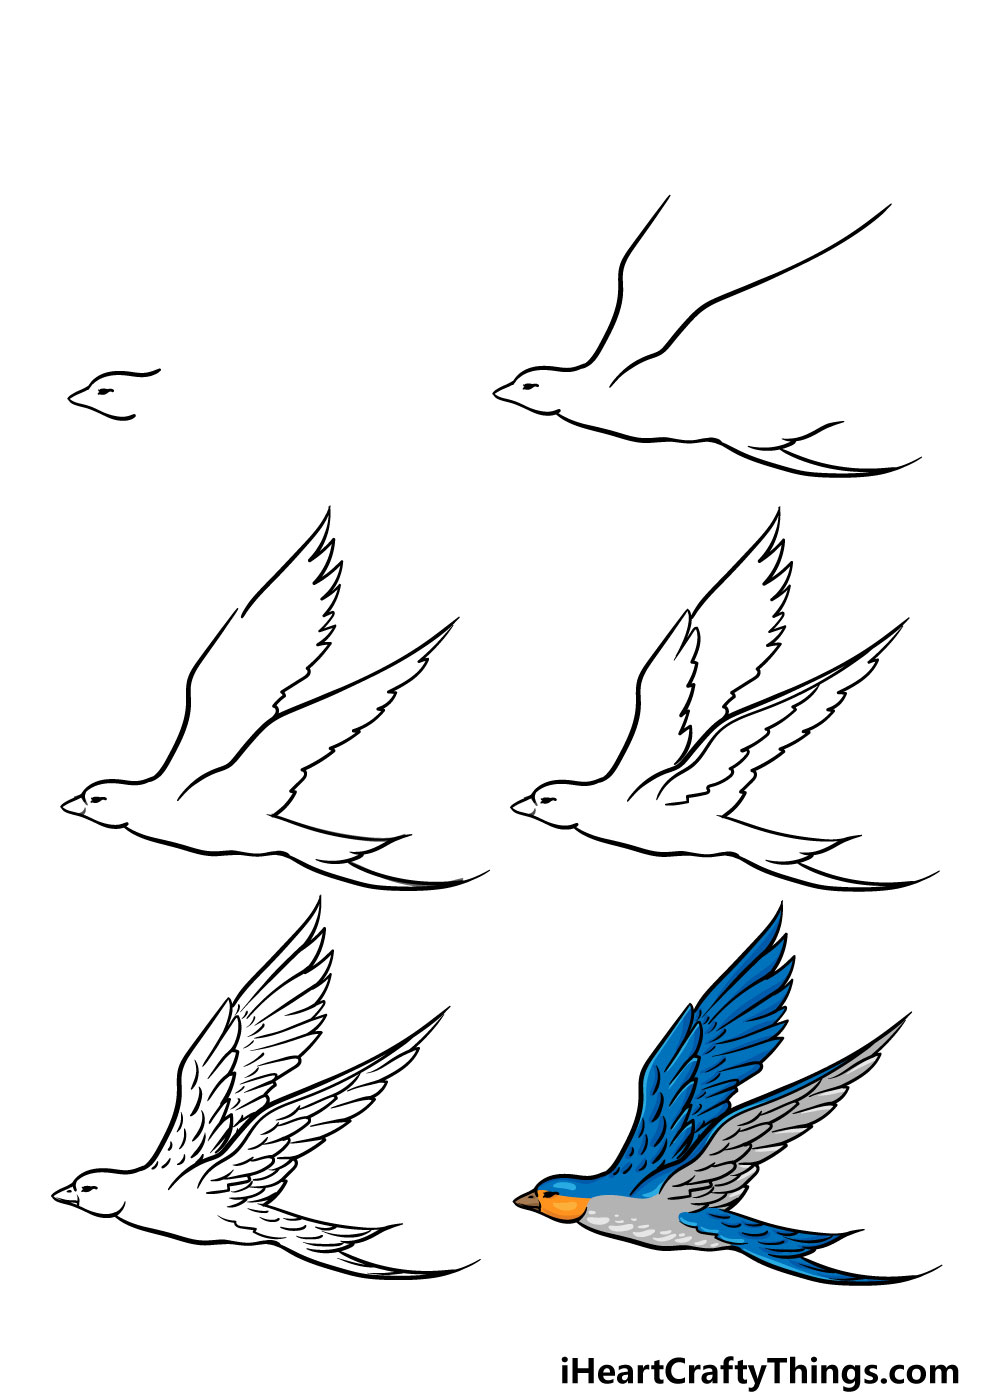 Flying Bird Drawing How To Draw A Flying Bird Step By Step